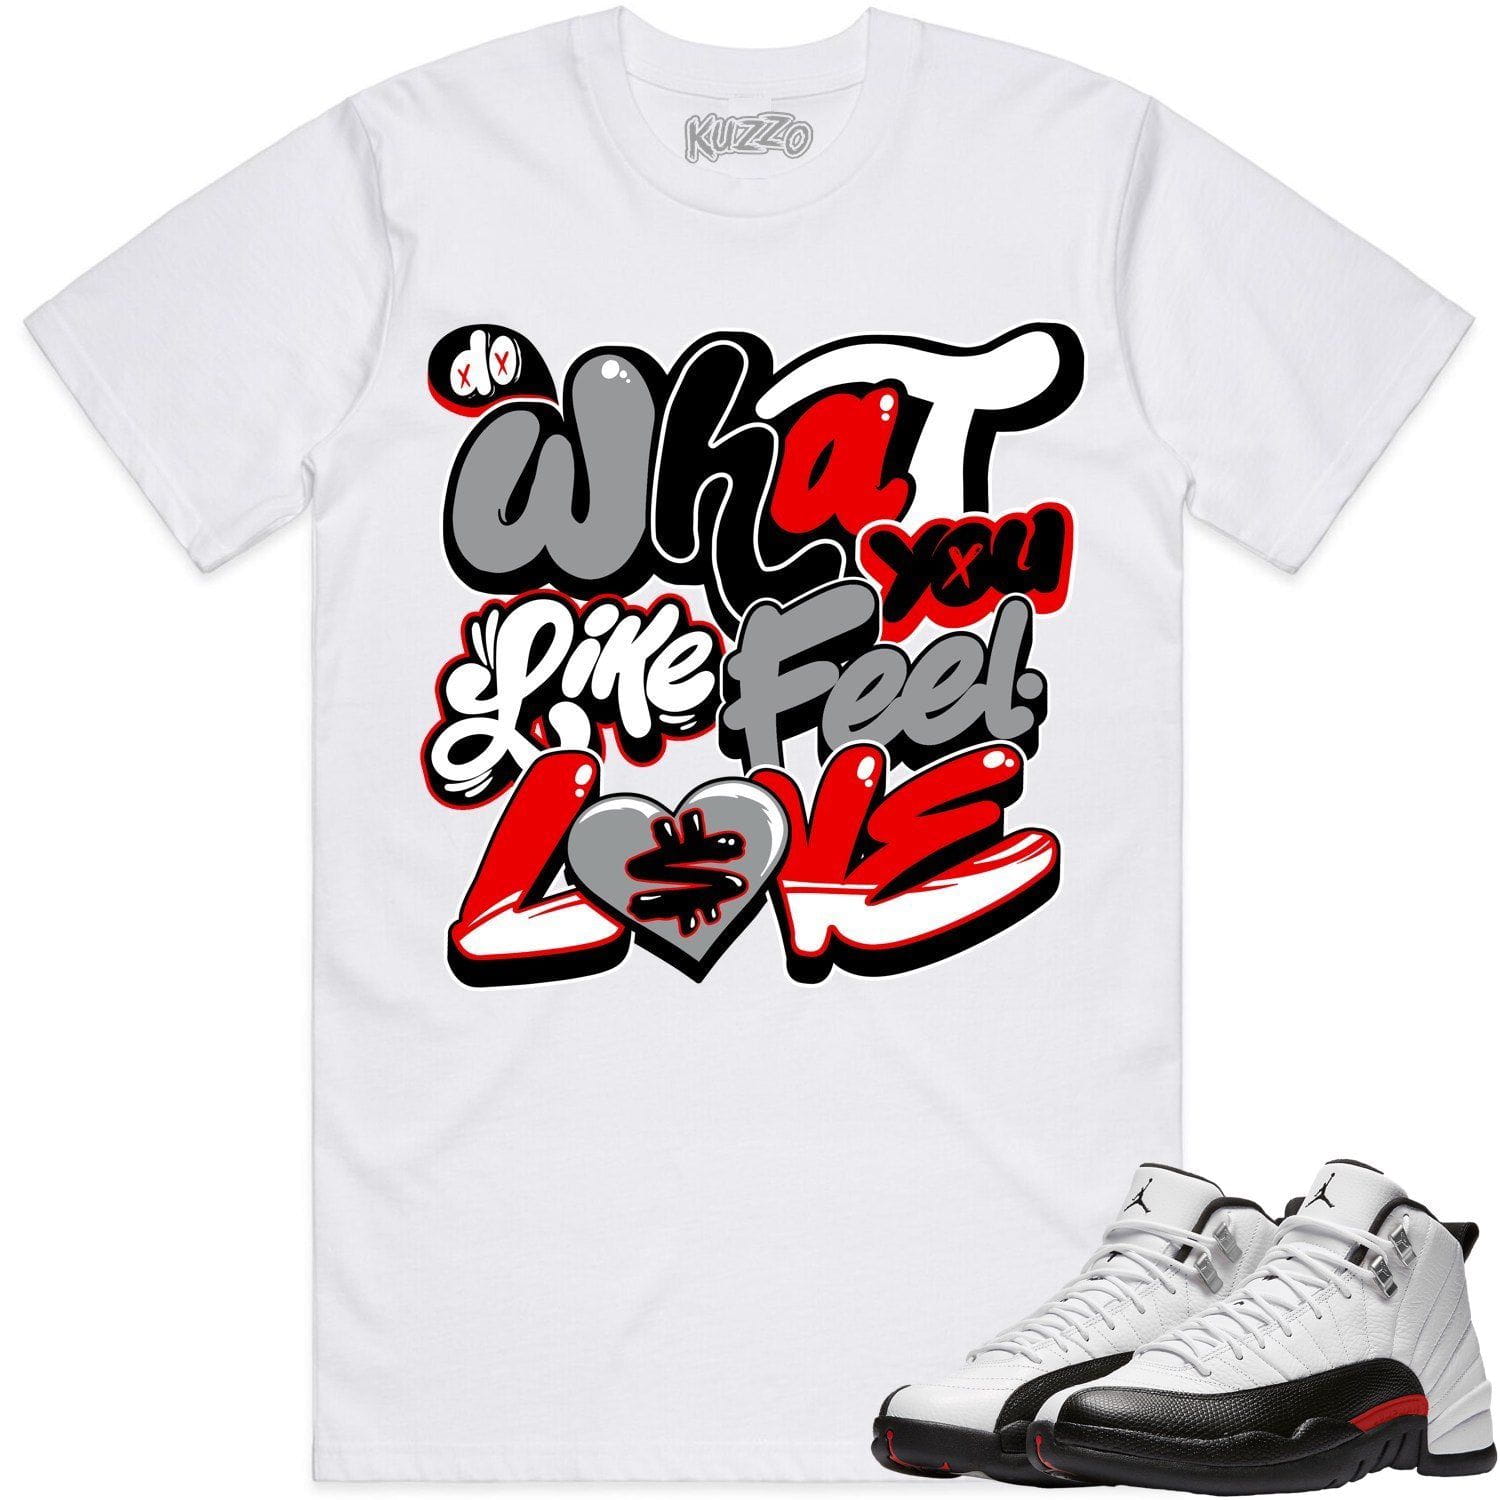 Red Taxi 12s Shirt - Jordan Retro 12 Red Taxi Shirts - Meant to Be